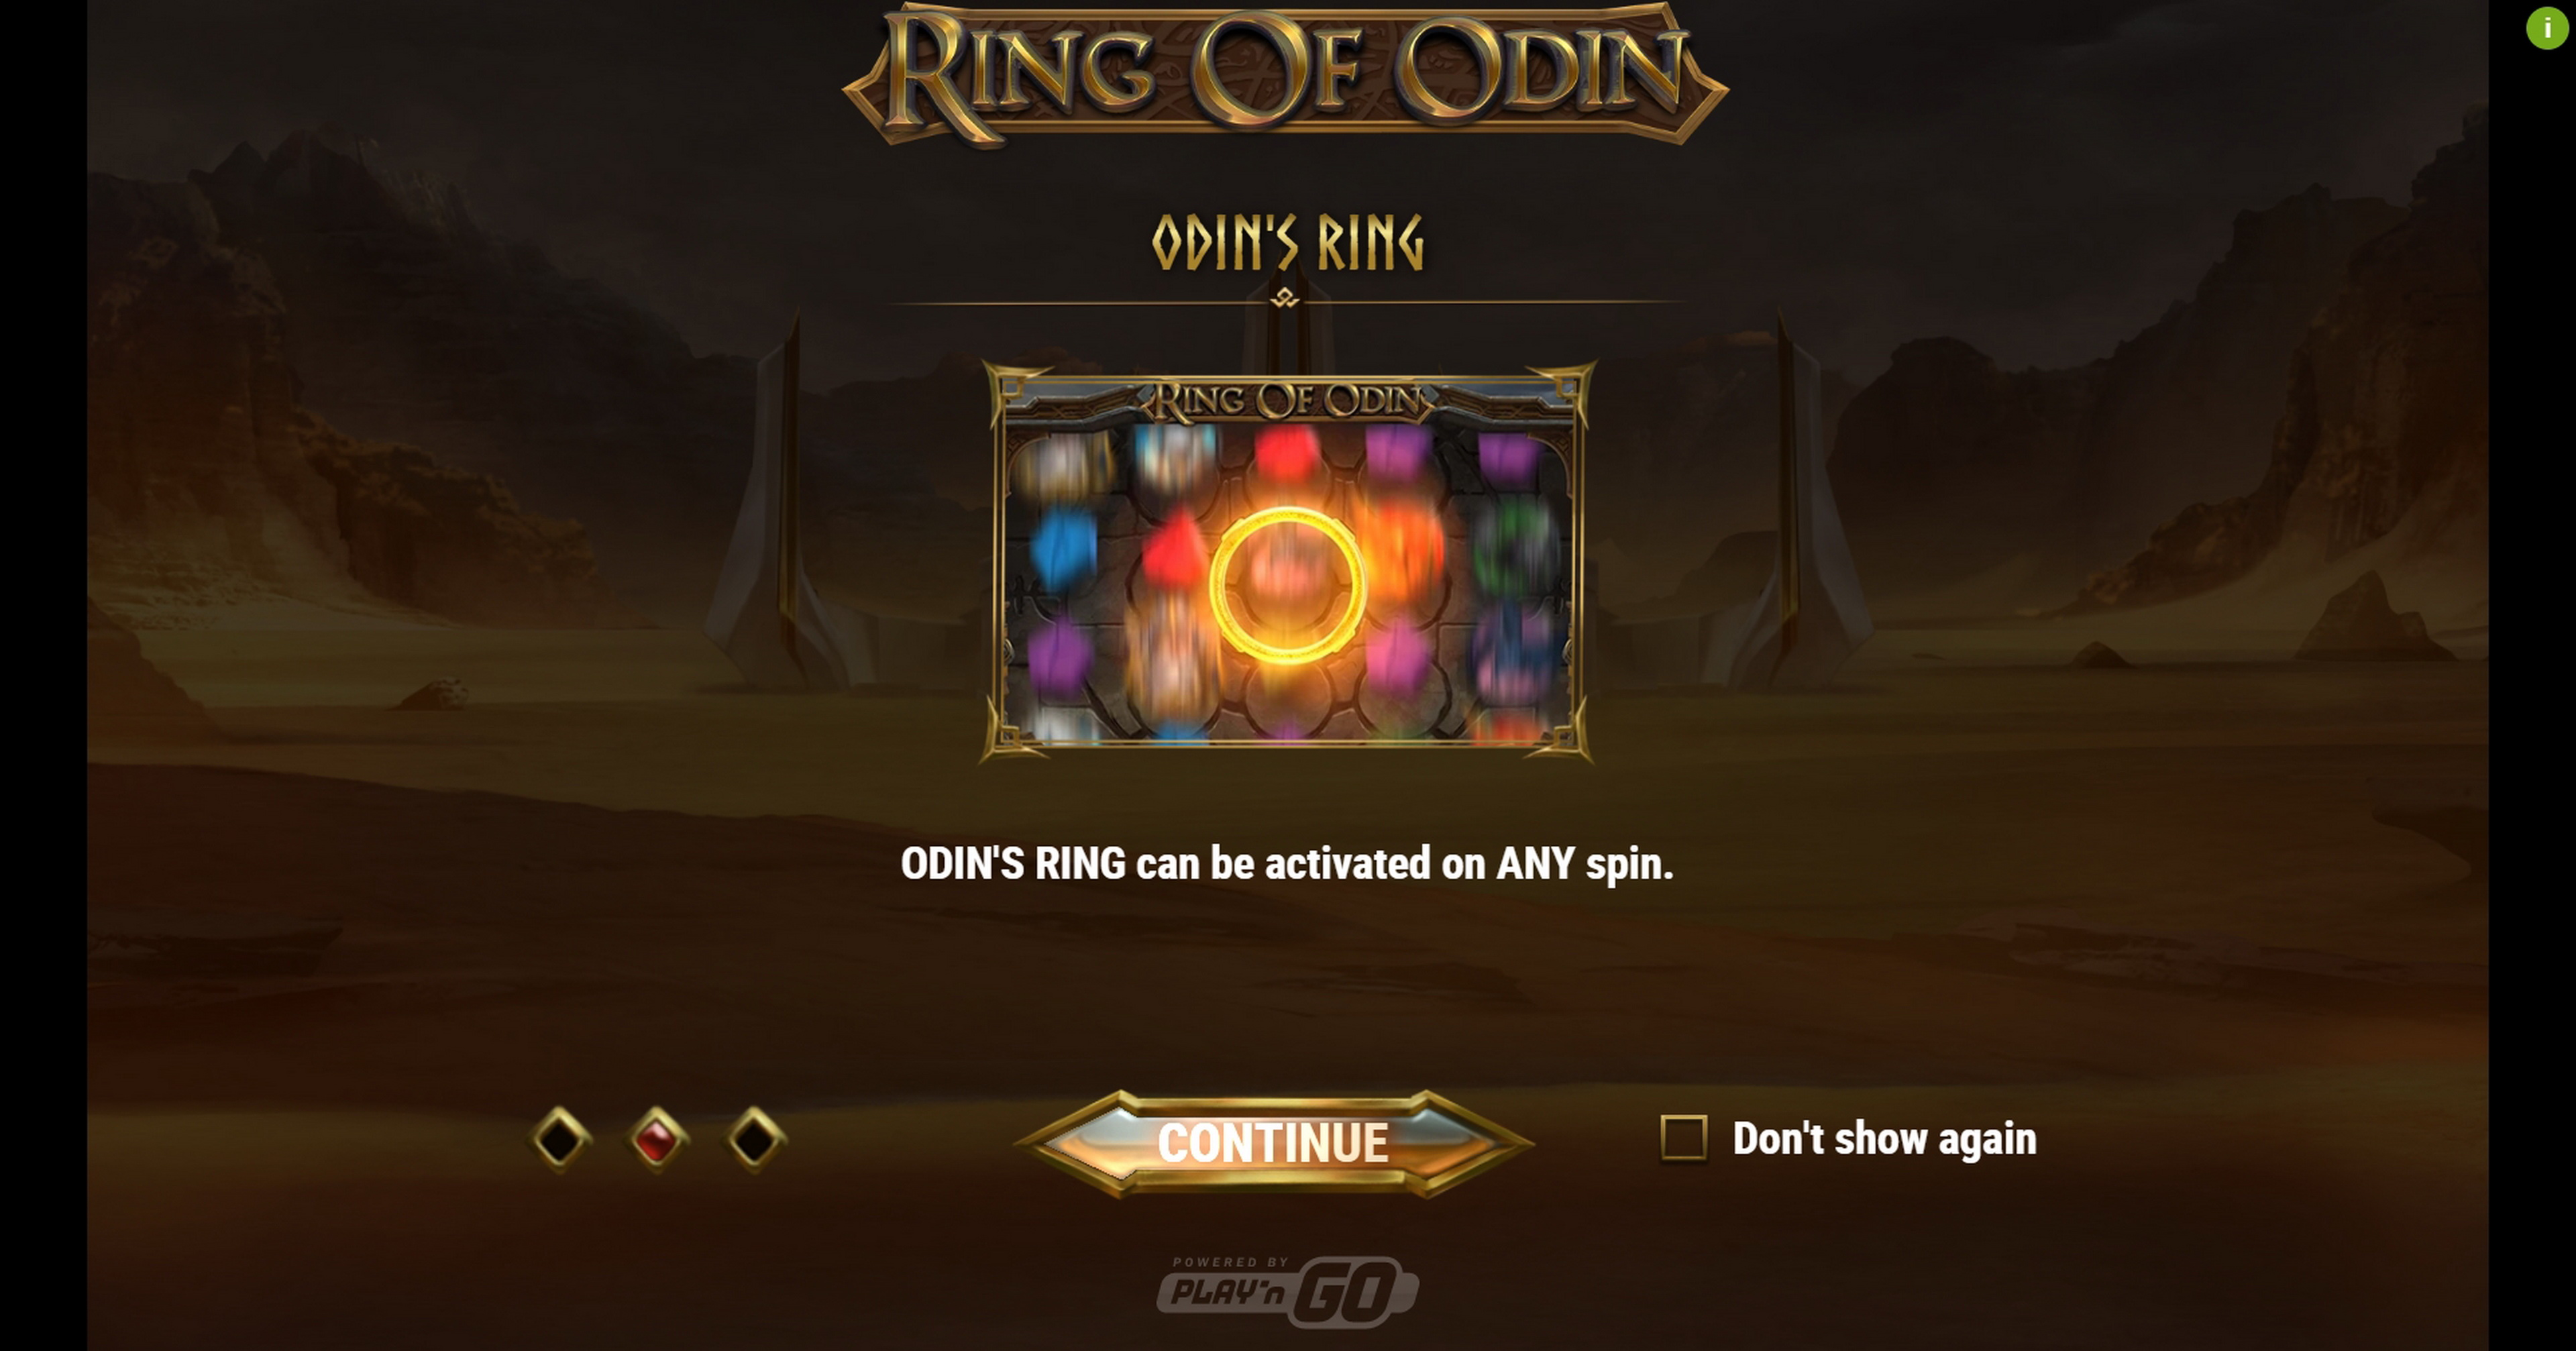 Play Ring of Odin Free Casino Slot Game by Playn GO